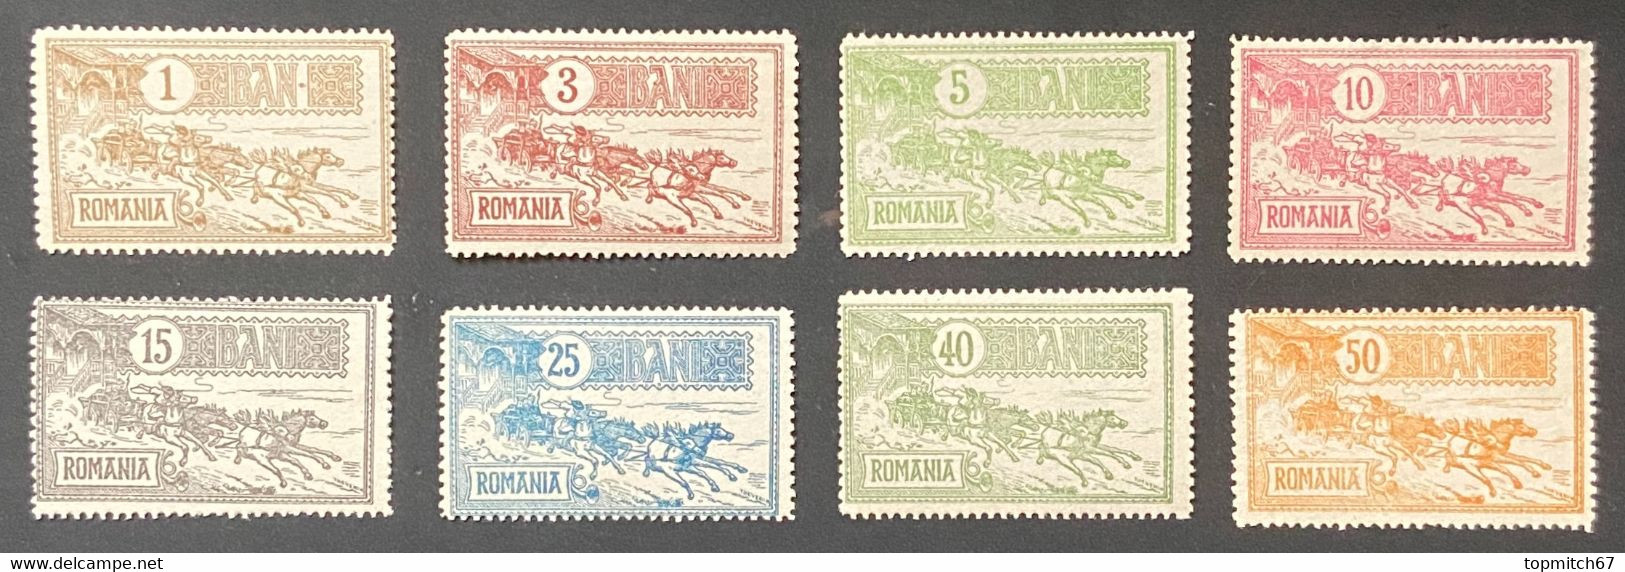 ROM0137-44MNH - Mail Coach - Complete Set Of 8 MNH Stamps - Romania - 1903 - Nuevos